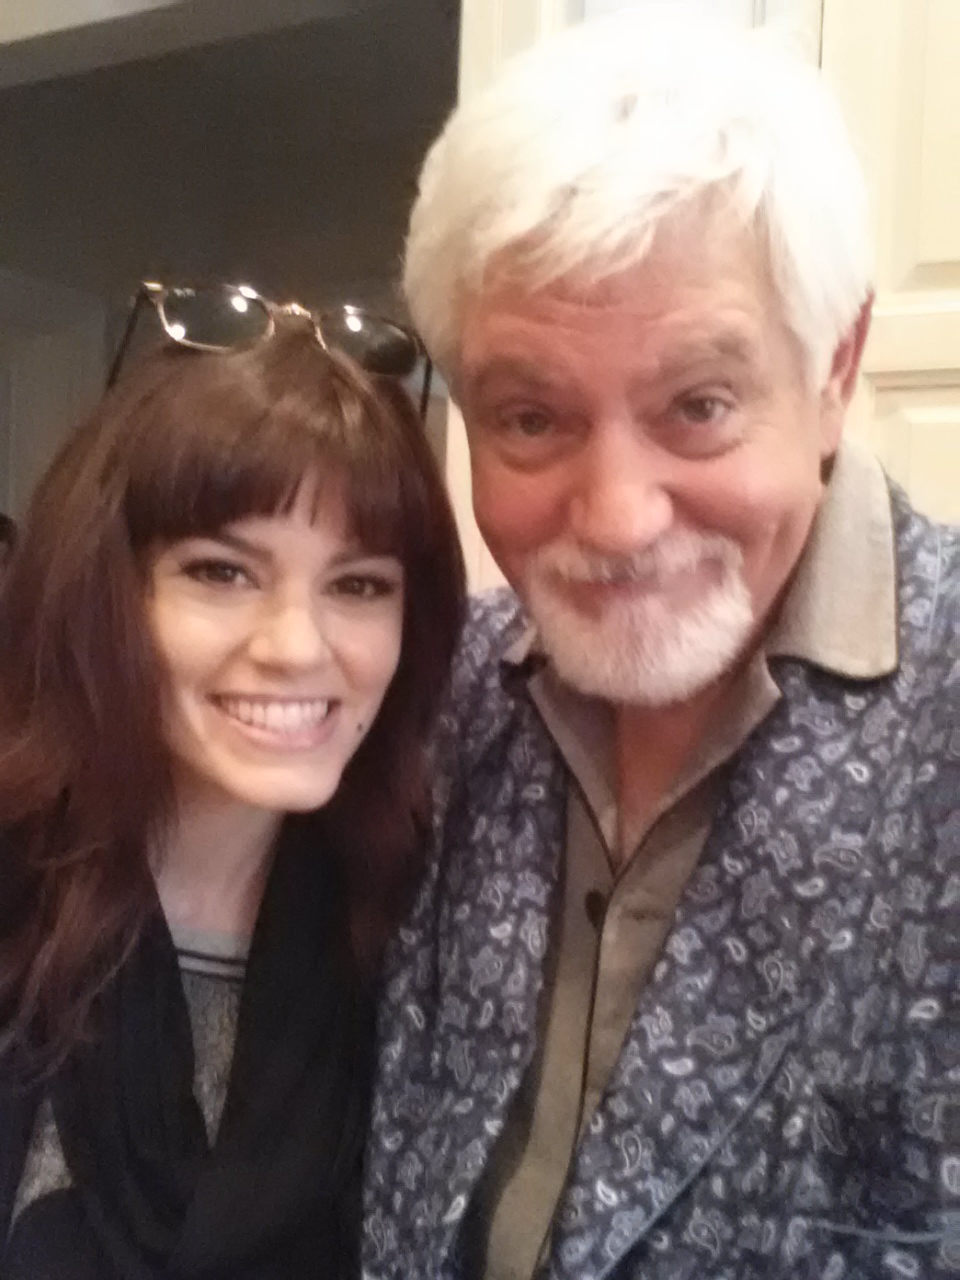 With Rachel Melvin, who plays my adopted daughter, Penny, in Dumb and Dumber To.